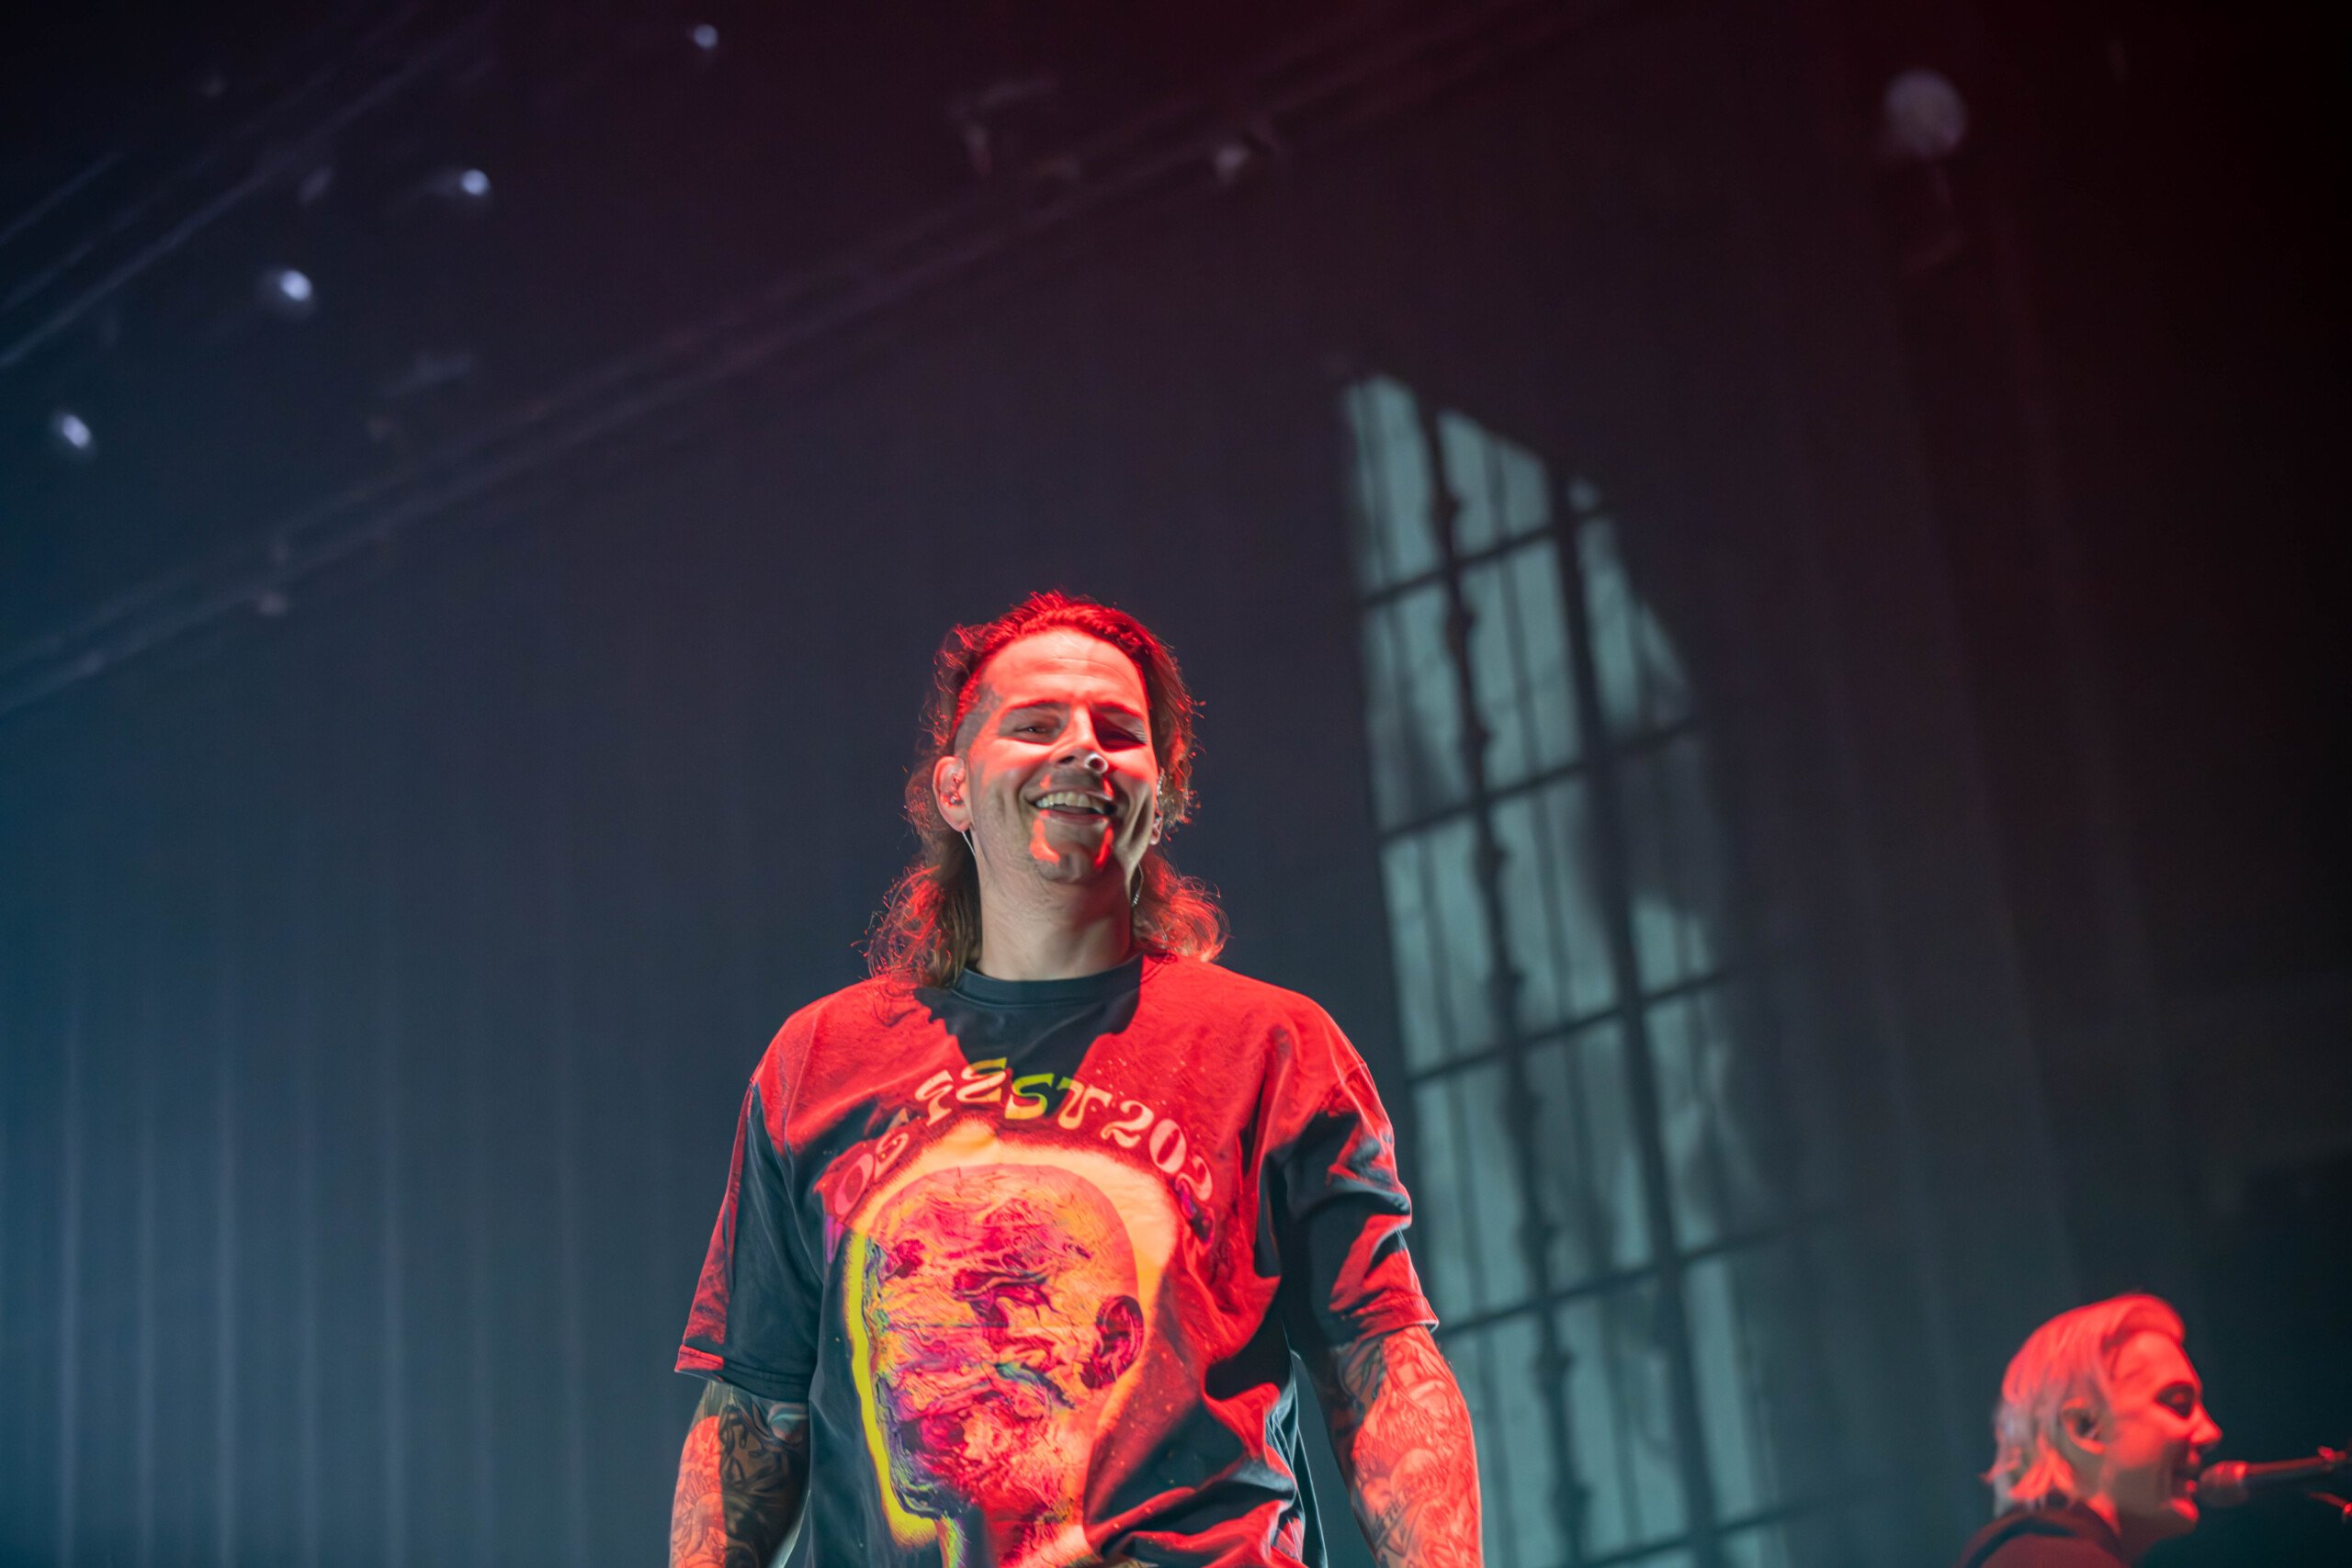 Photos: Avenged Sevenfold takes over T-Mobile